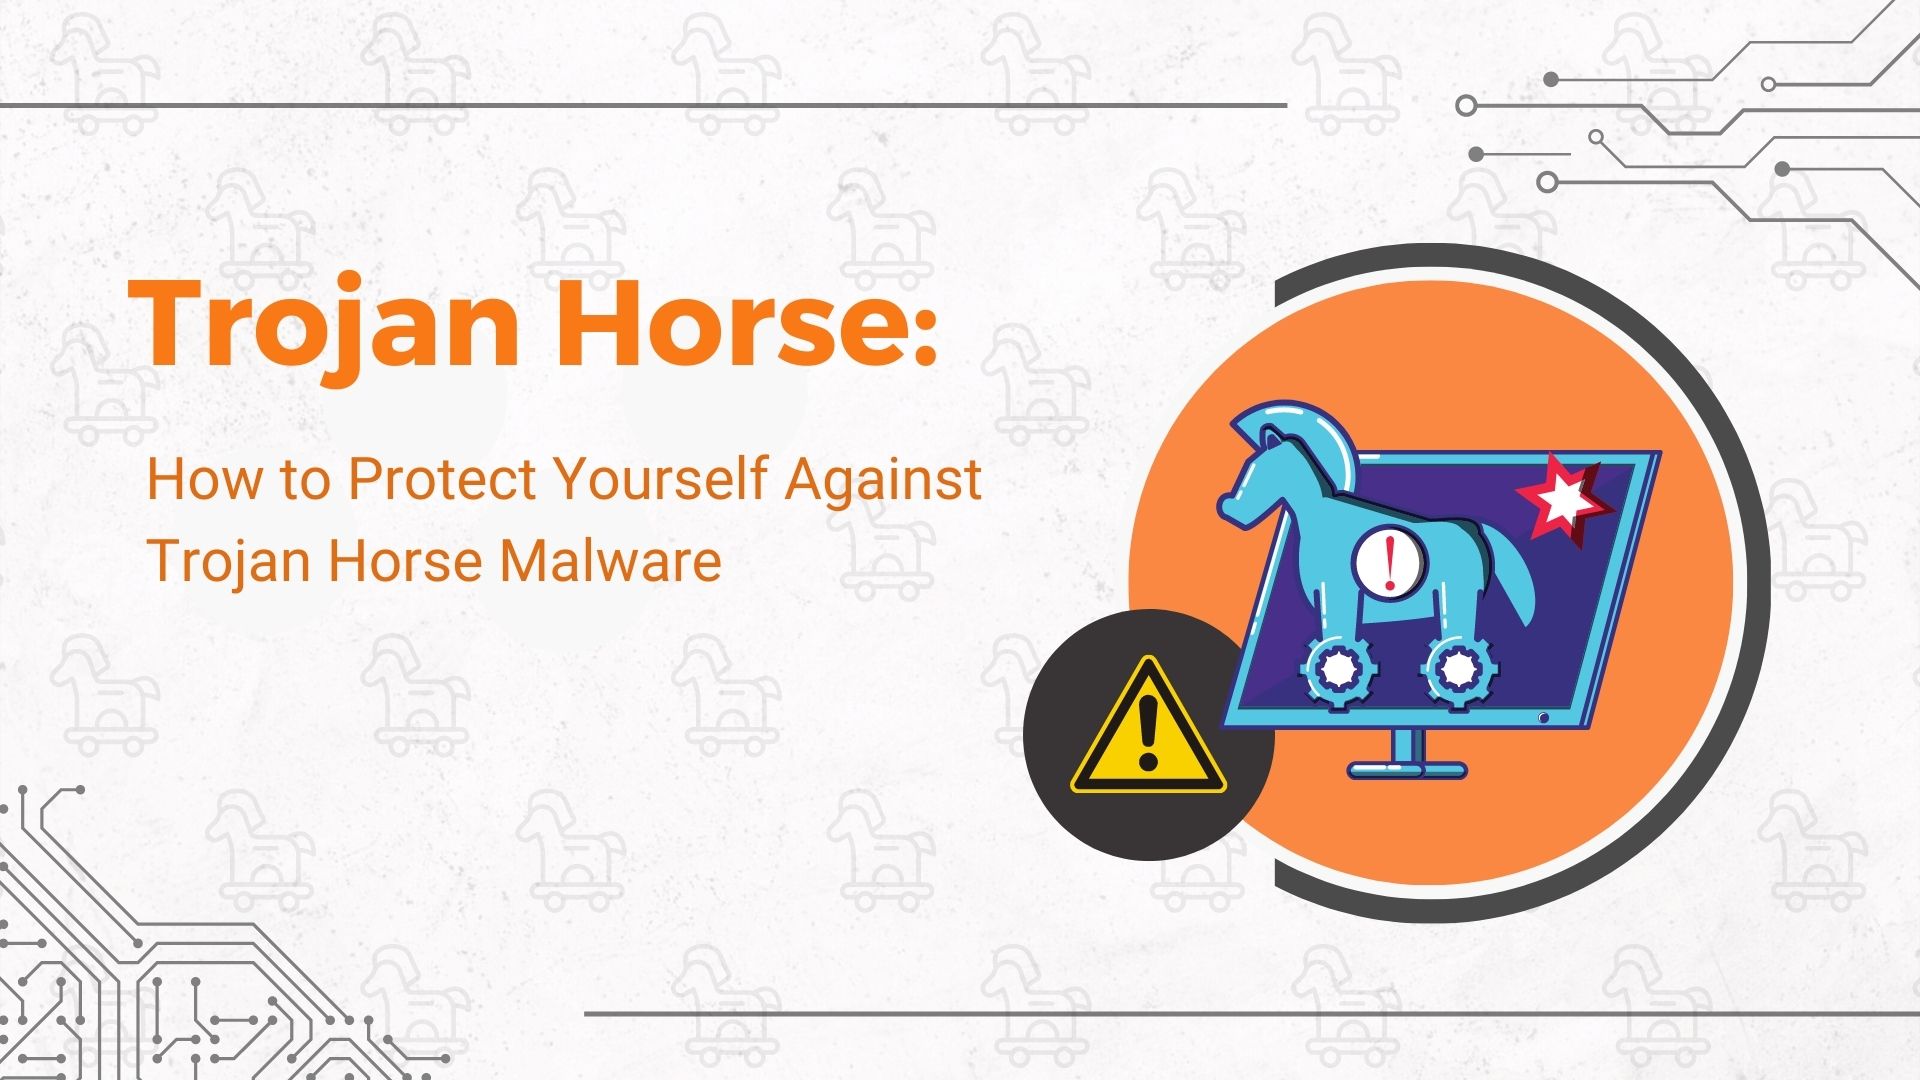 Trojan horses: strings.exe downloads from untrusted sources may contain Trojan horses, which can give hackers unauthorized access to your system and steal sensitive information.
Keyloggers: downloading strings.exe from suspicious websites can introduce keyloggers, which record your keystrokes and can capture sensitive information like passwords and credit card details.